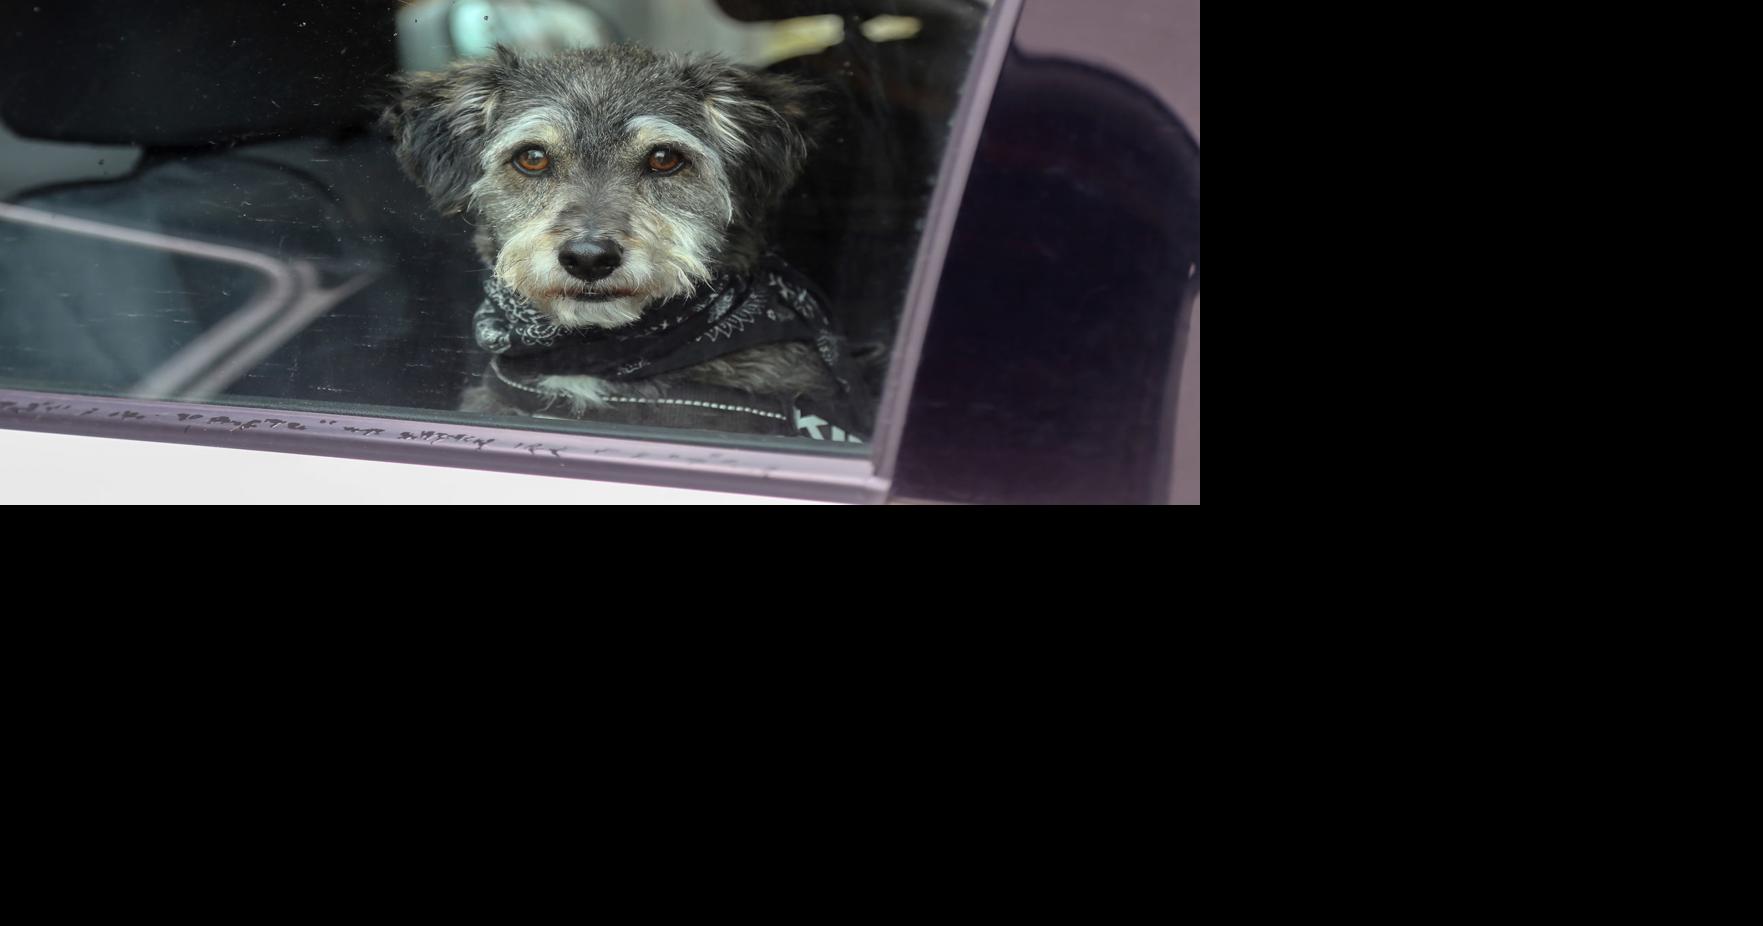 Dog owners risk pets’ health by leaving them in hot cars, Nebraska Humane Society says